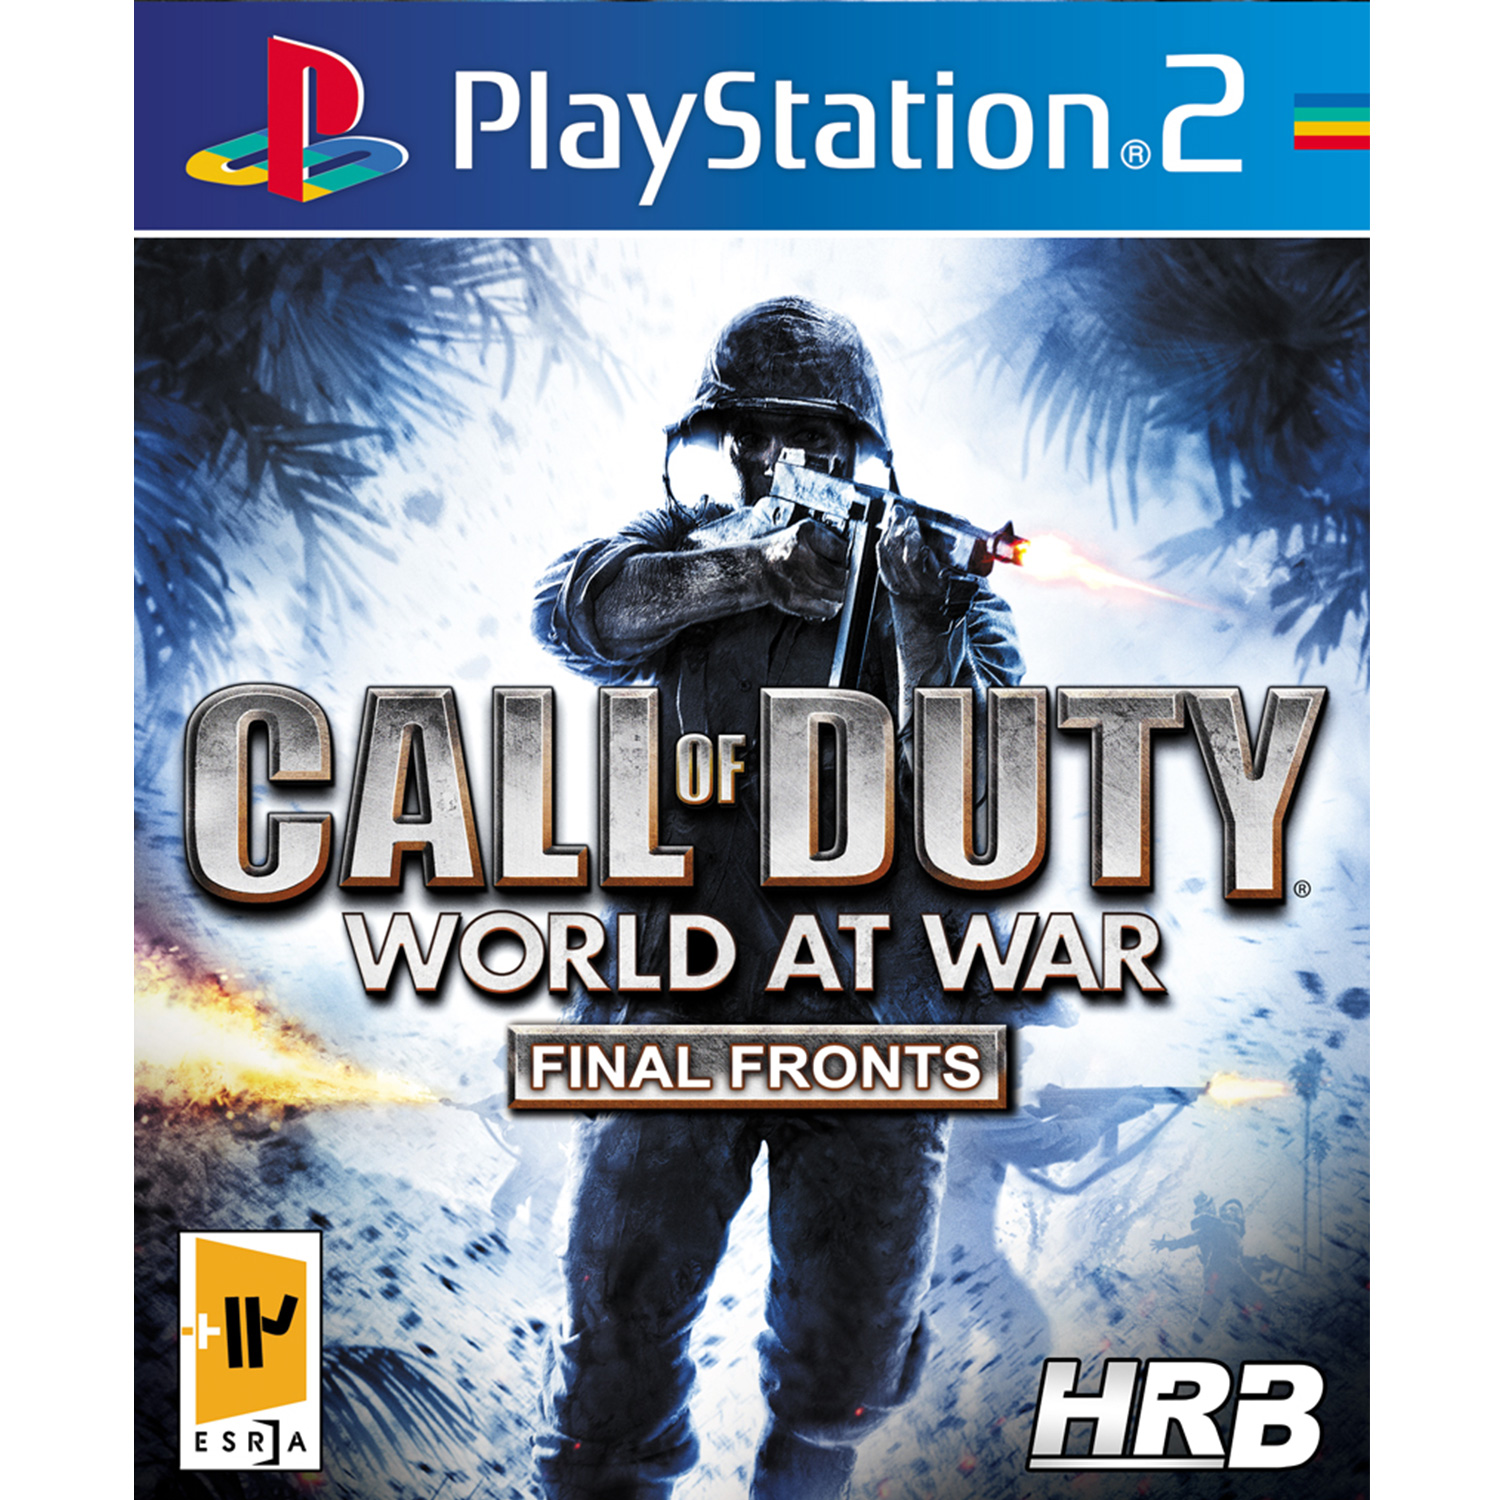 CALL OF DUTY : WORLD AT WAR : FINAL FRONTS - Playstation 2 (PS2) iso  download